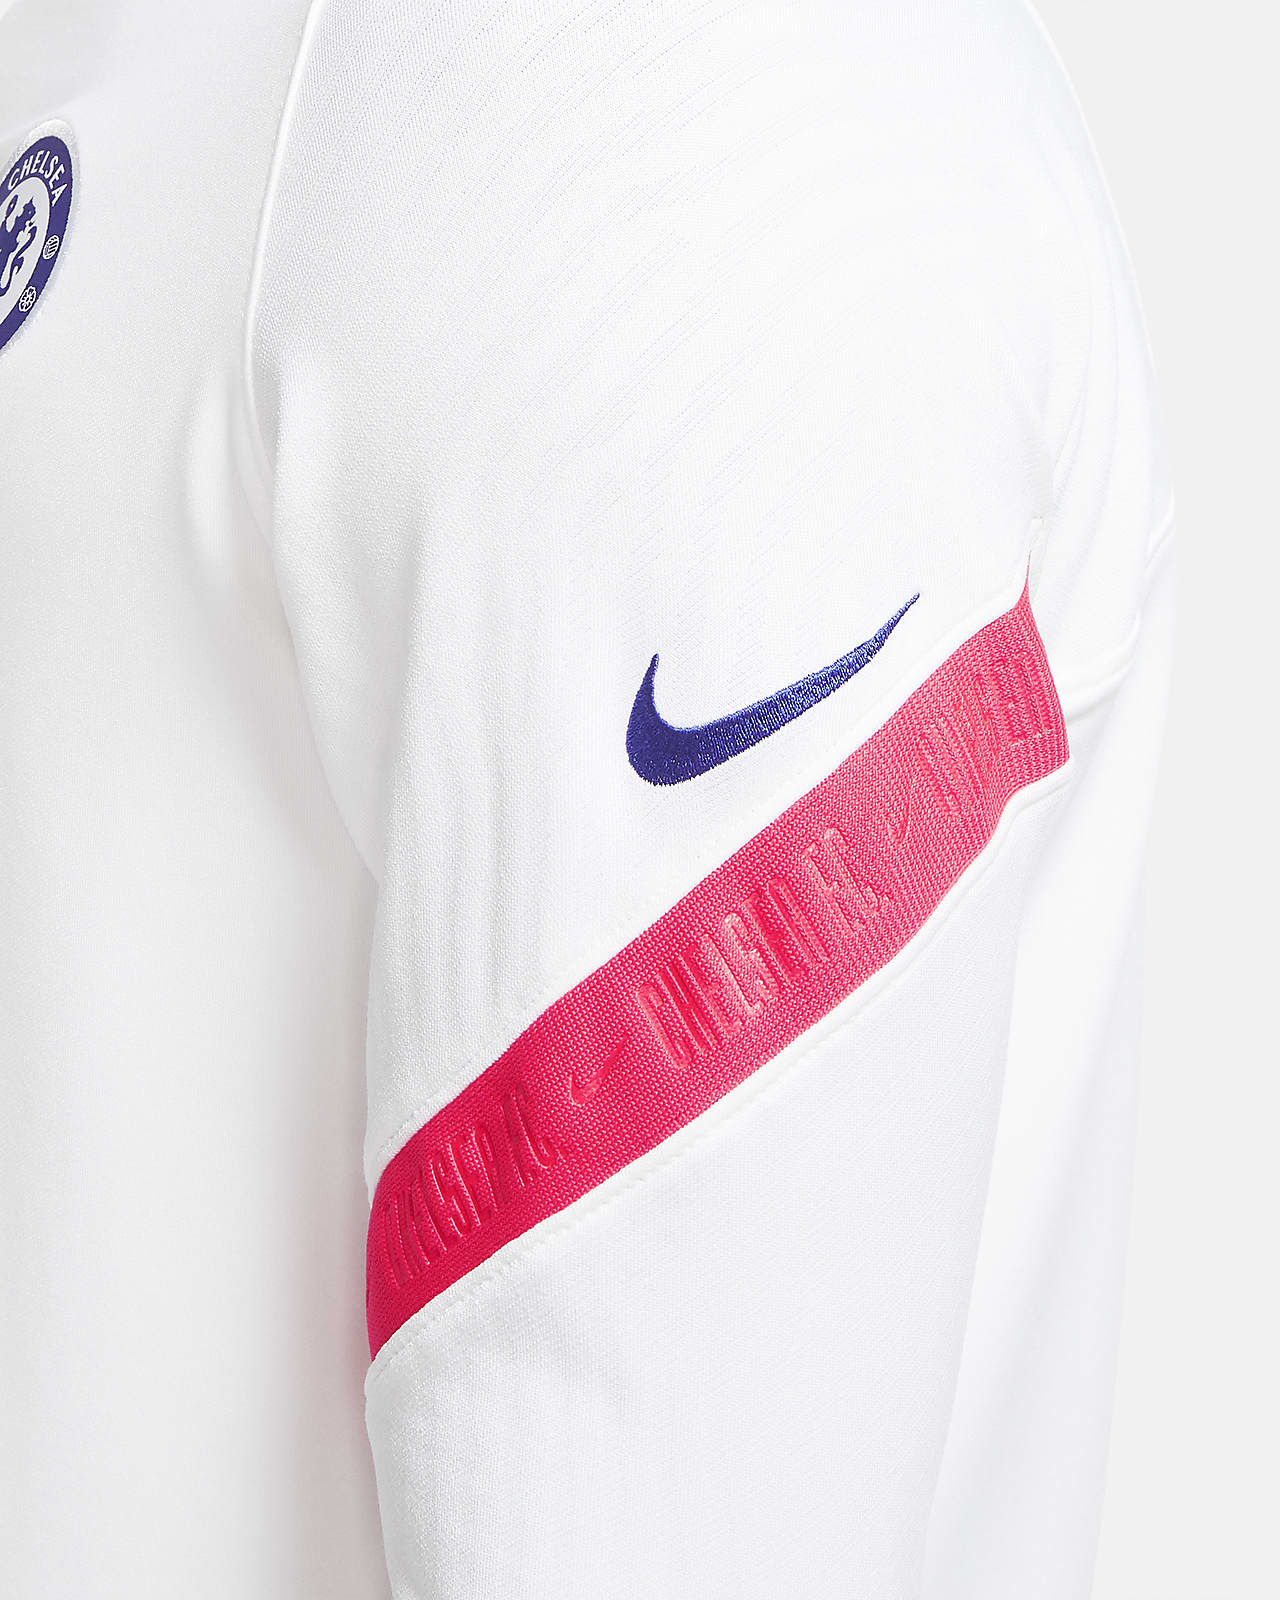 nike drill top white